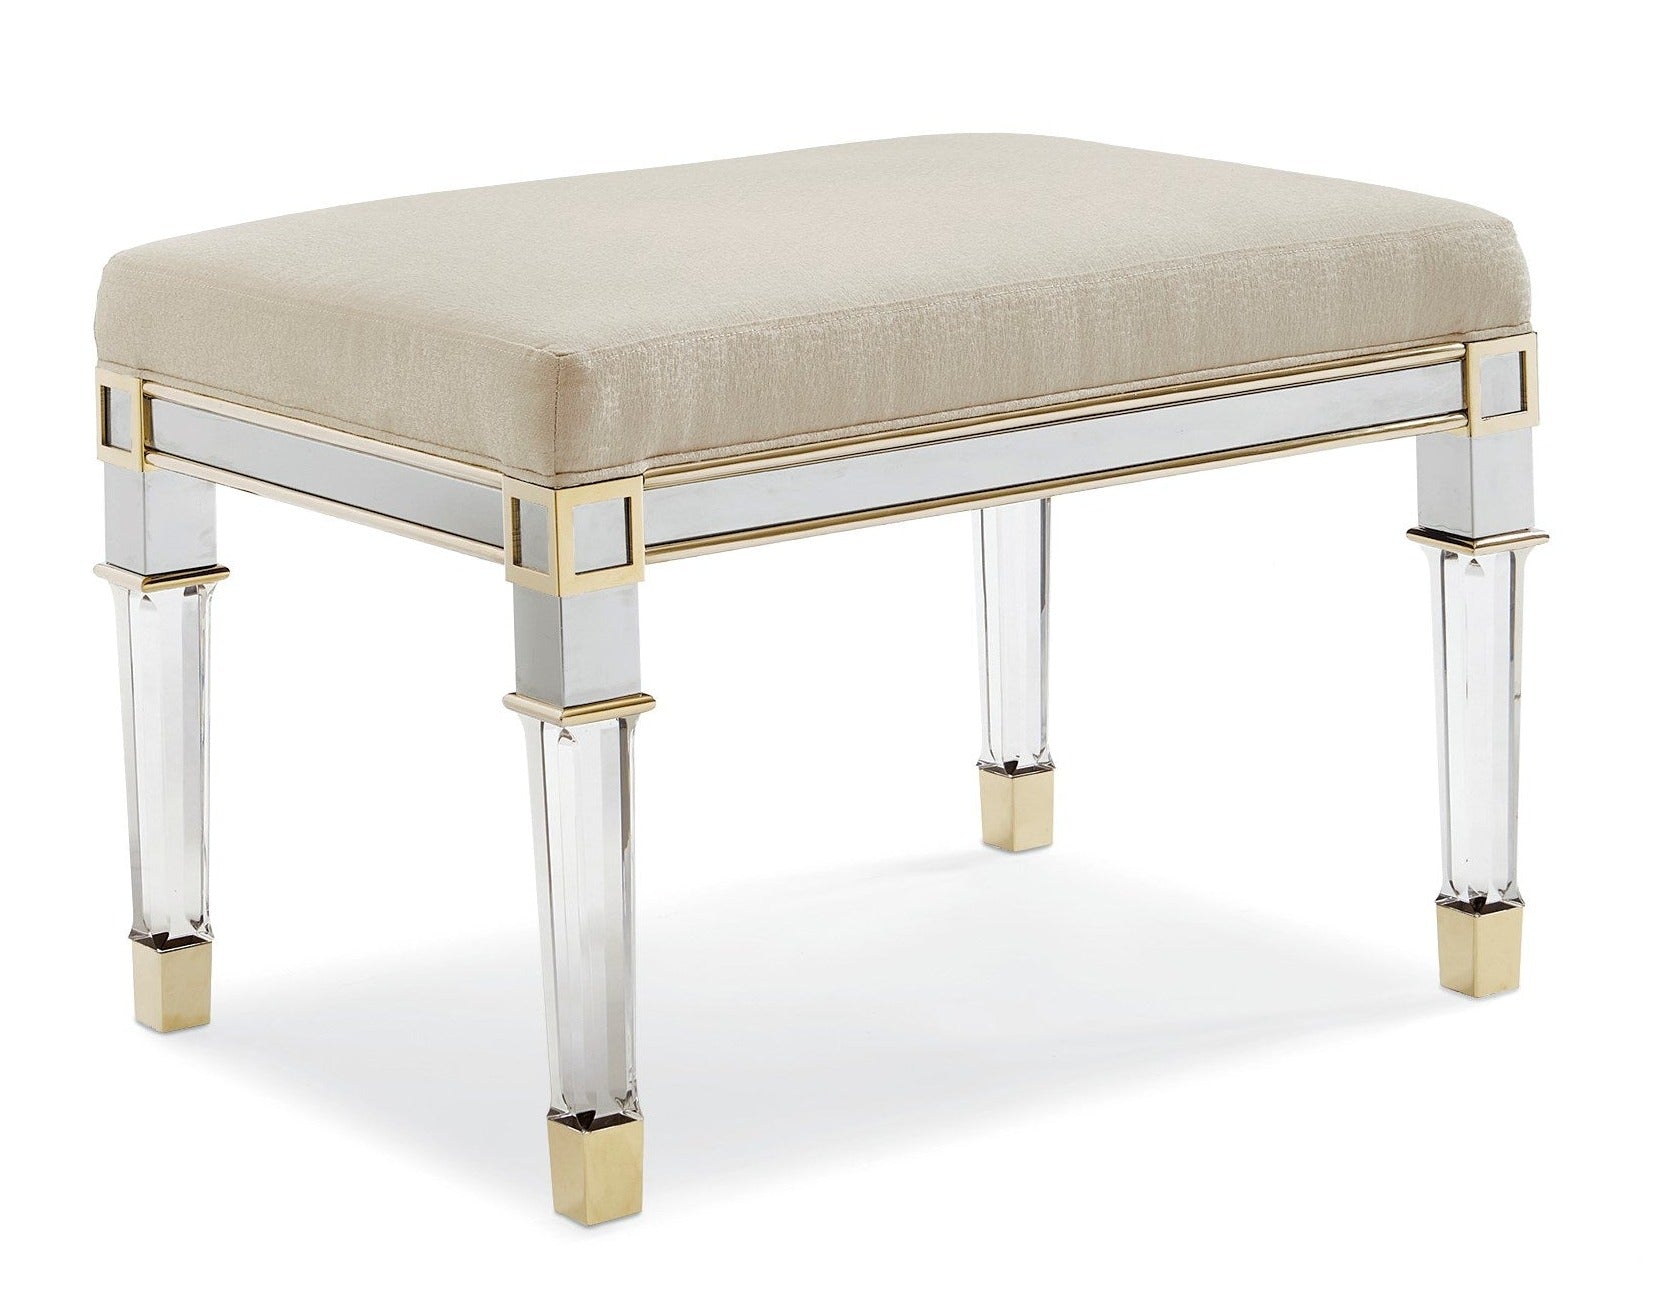 SILVER AND GOLD Bench